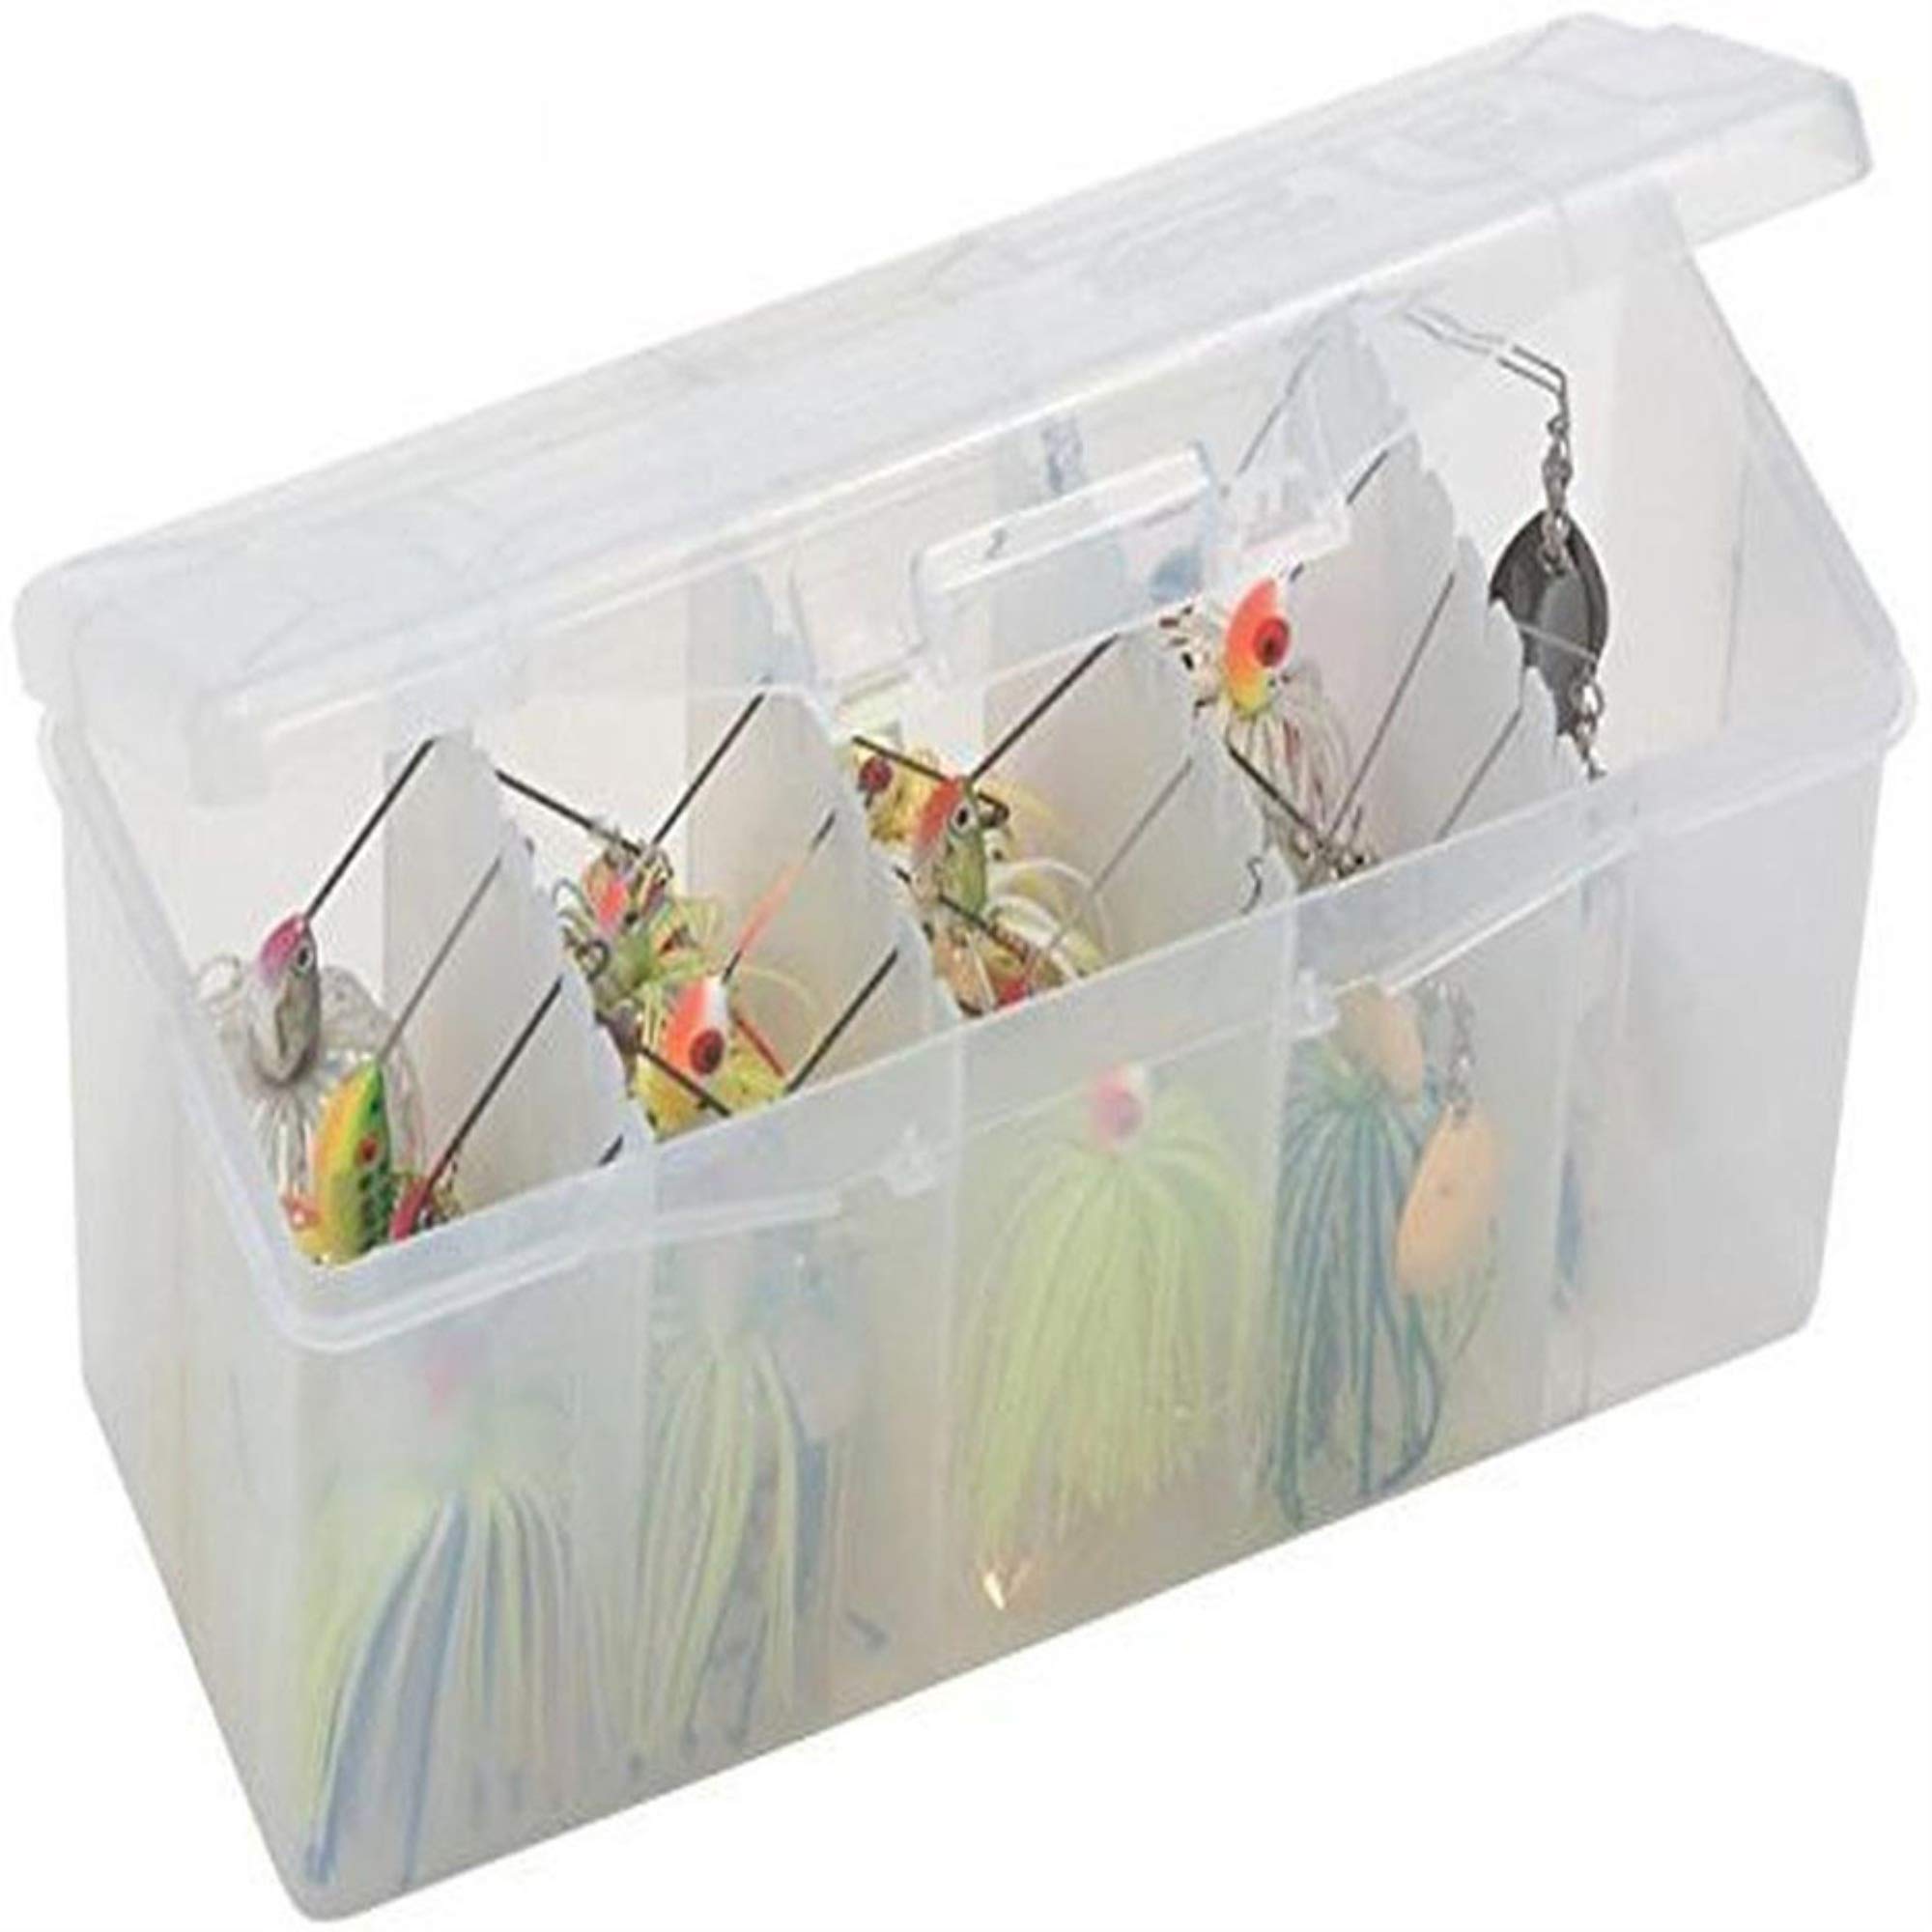 Plano Spinner Bait StowAway Multi-compartment Box Premium Tackle Storage  for Fishing 5 Compartments